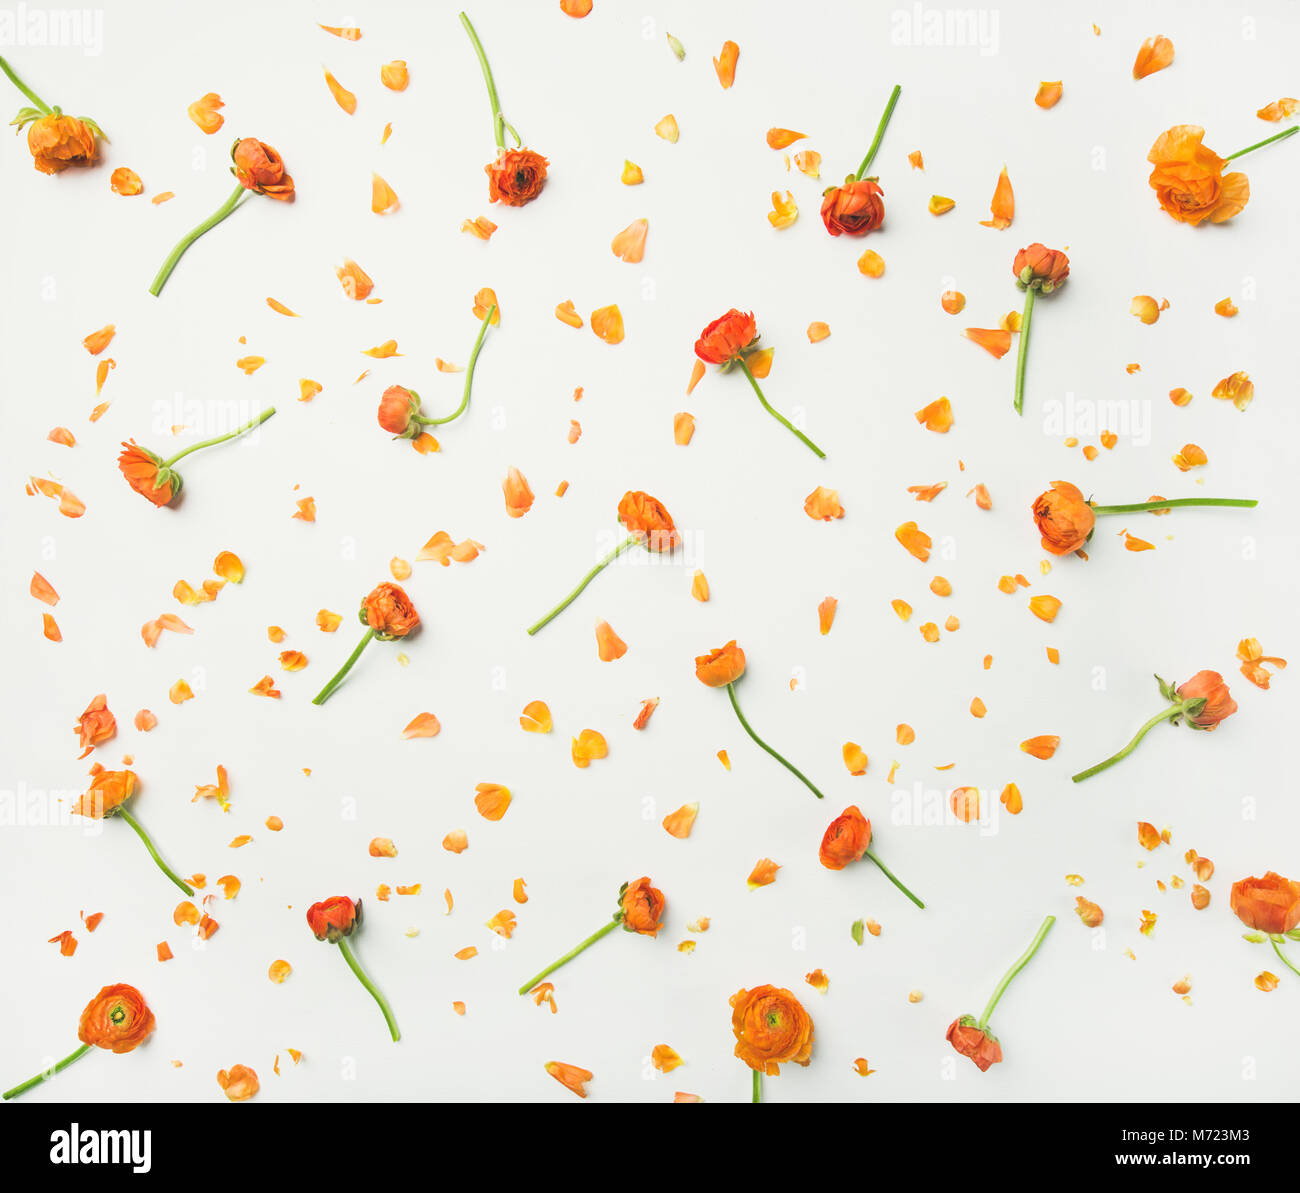 Flat-lay of orange buttercup flowers over white background Stock Photo